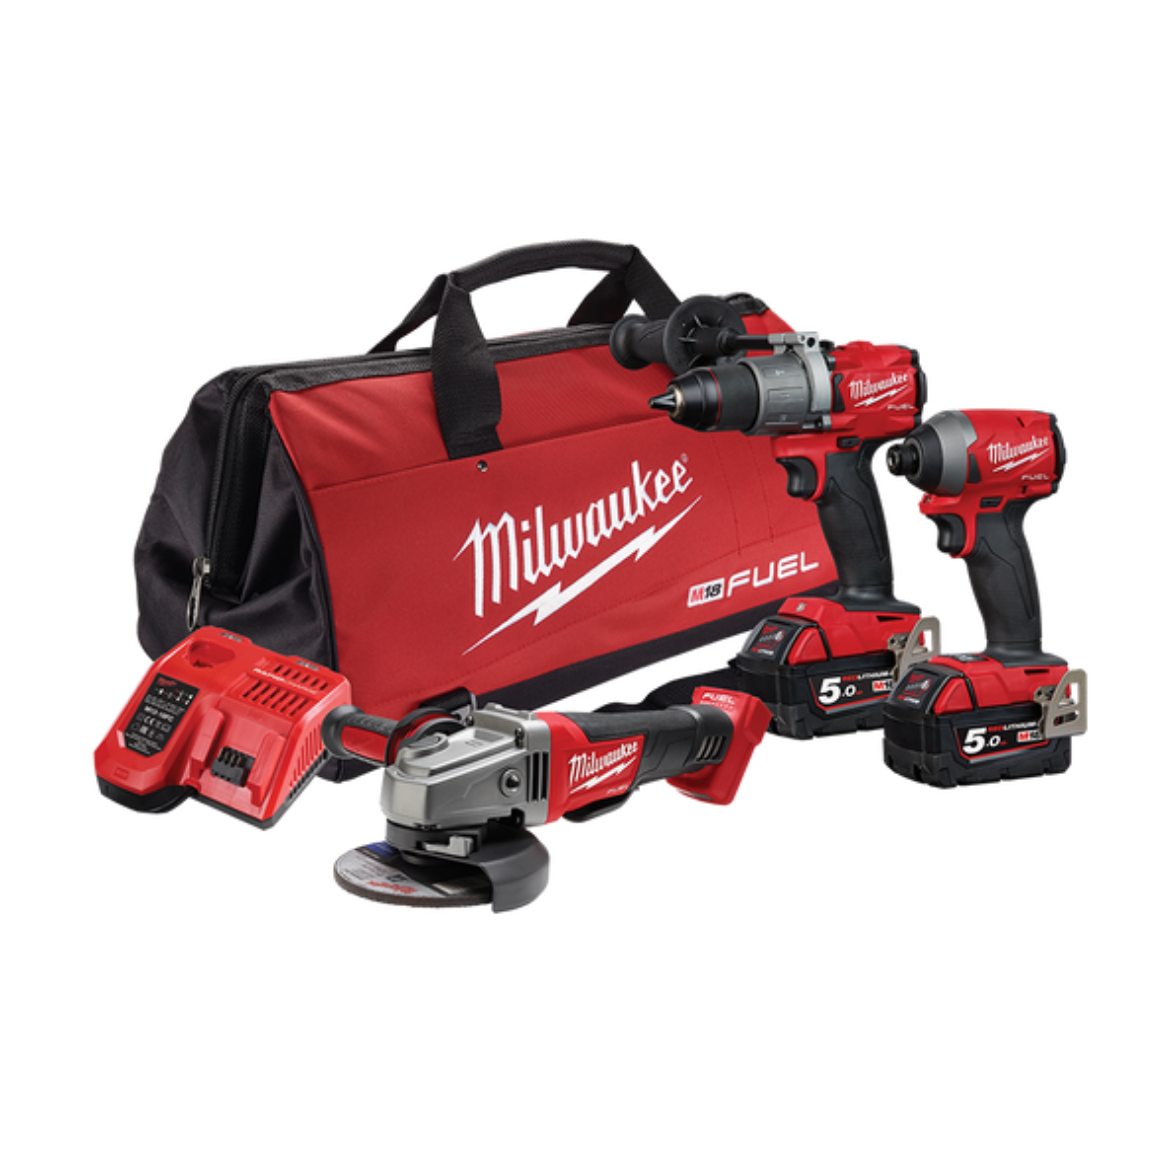 Picture of MILWAUKEE 3PC KIT M18 13MM HAMMER DRILL/DRIVER, 1/4" HEX IMPACT DRIVER, 5"GRINDER, 2 X 5 Ah BATTERY